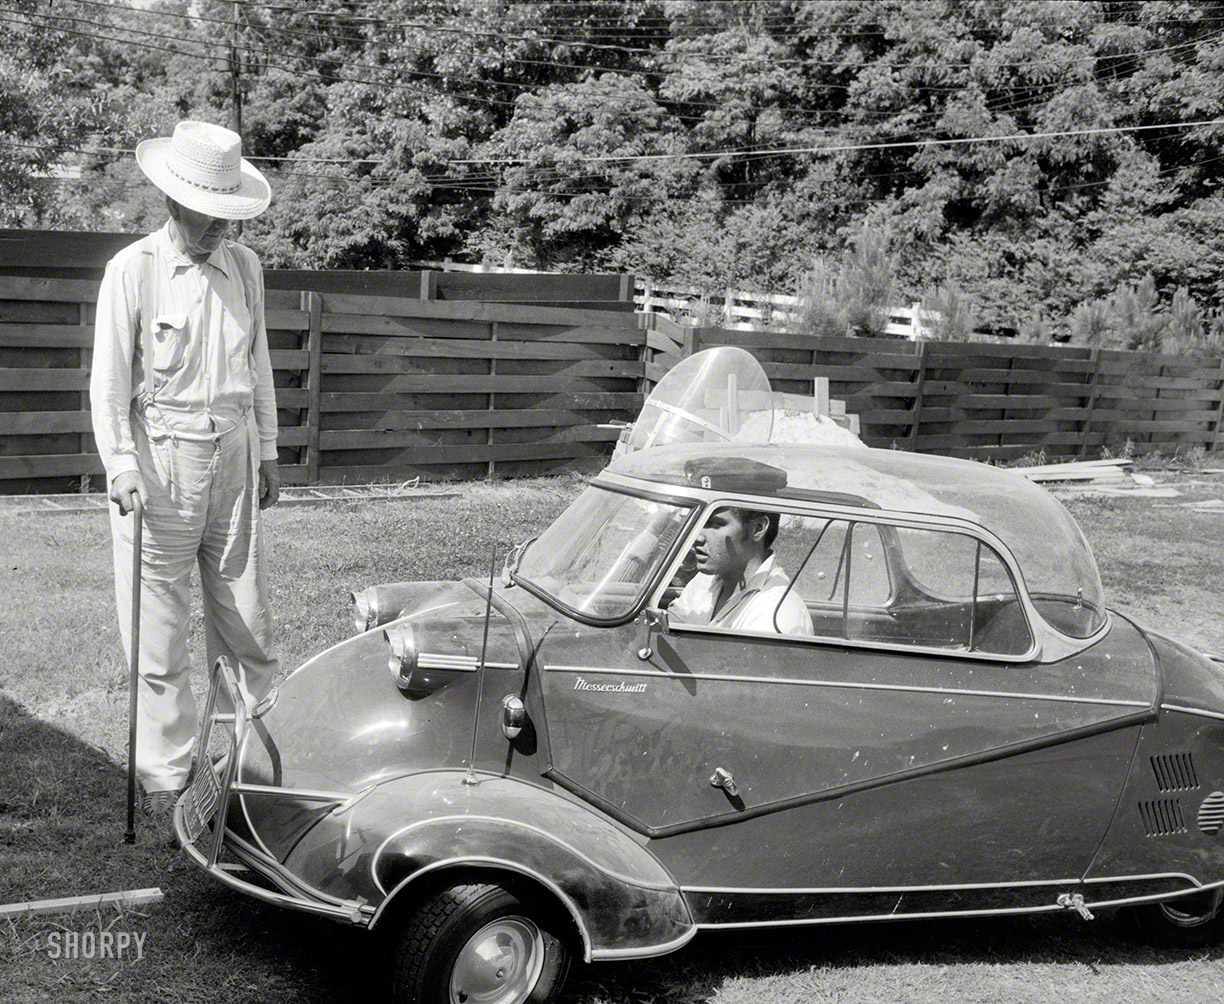 Elvis Presley in 1956 at home in Memphis with his three-wheeled Messerschmitt "bubble car" and Harley-Davidson motorcycle, and grandfather Jessie Presley. Photo by Phillip Harrington for Look magazine. View full size.